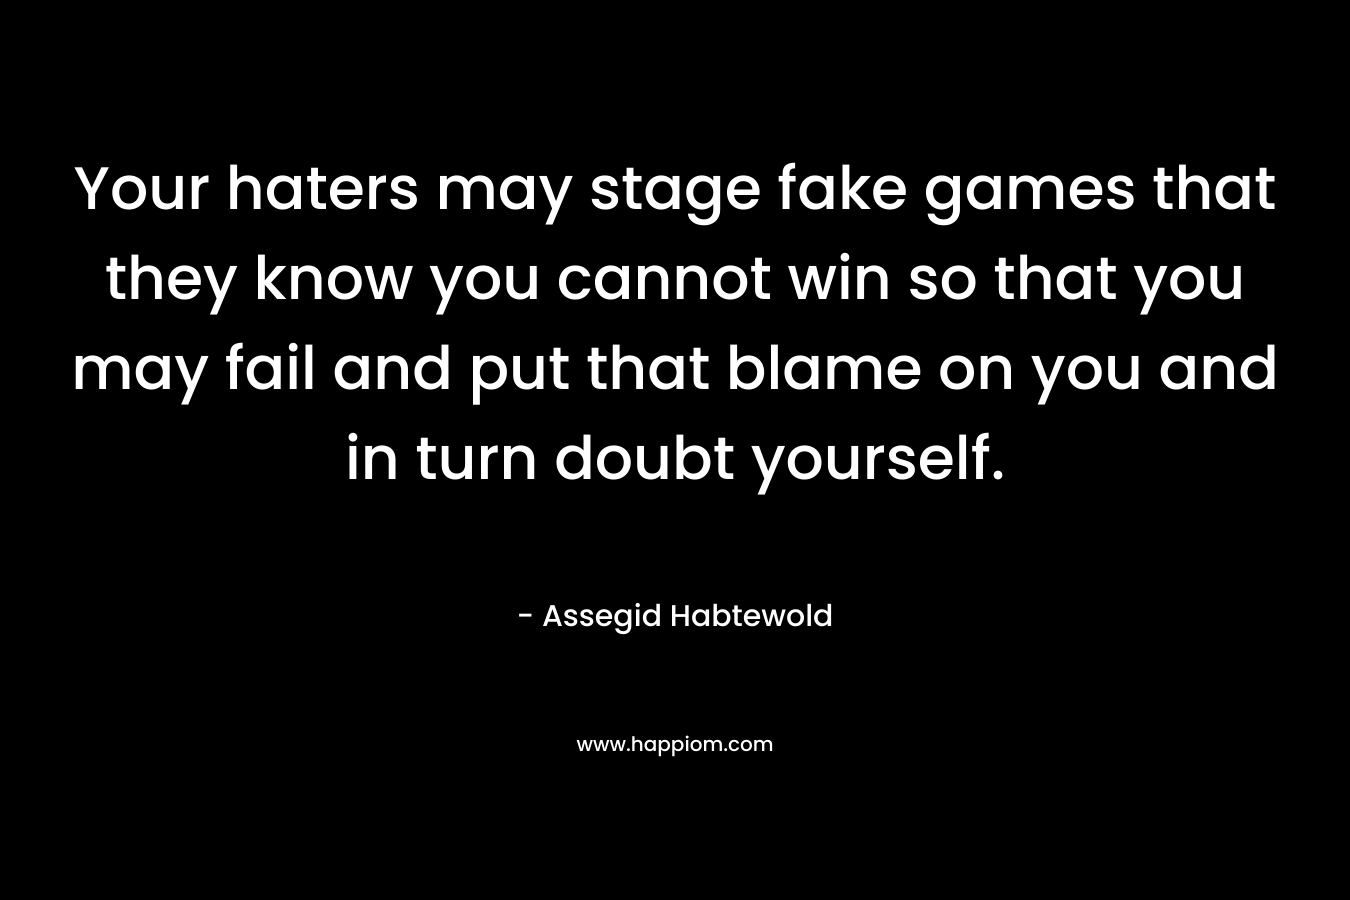 Your haters may stage fake games that they know you cannot win so that you may fail and put that blame on you and in turn doubt yourself. – Assegid Habtewold